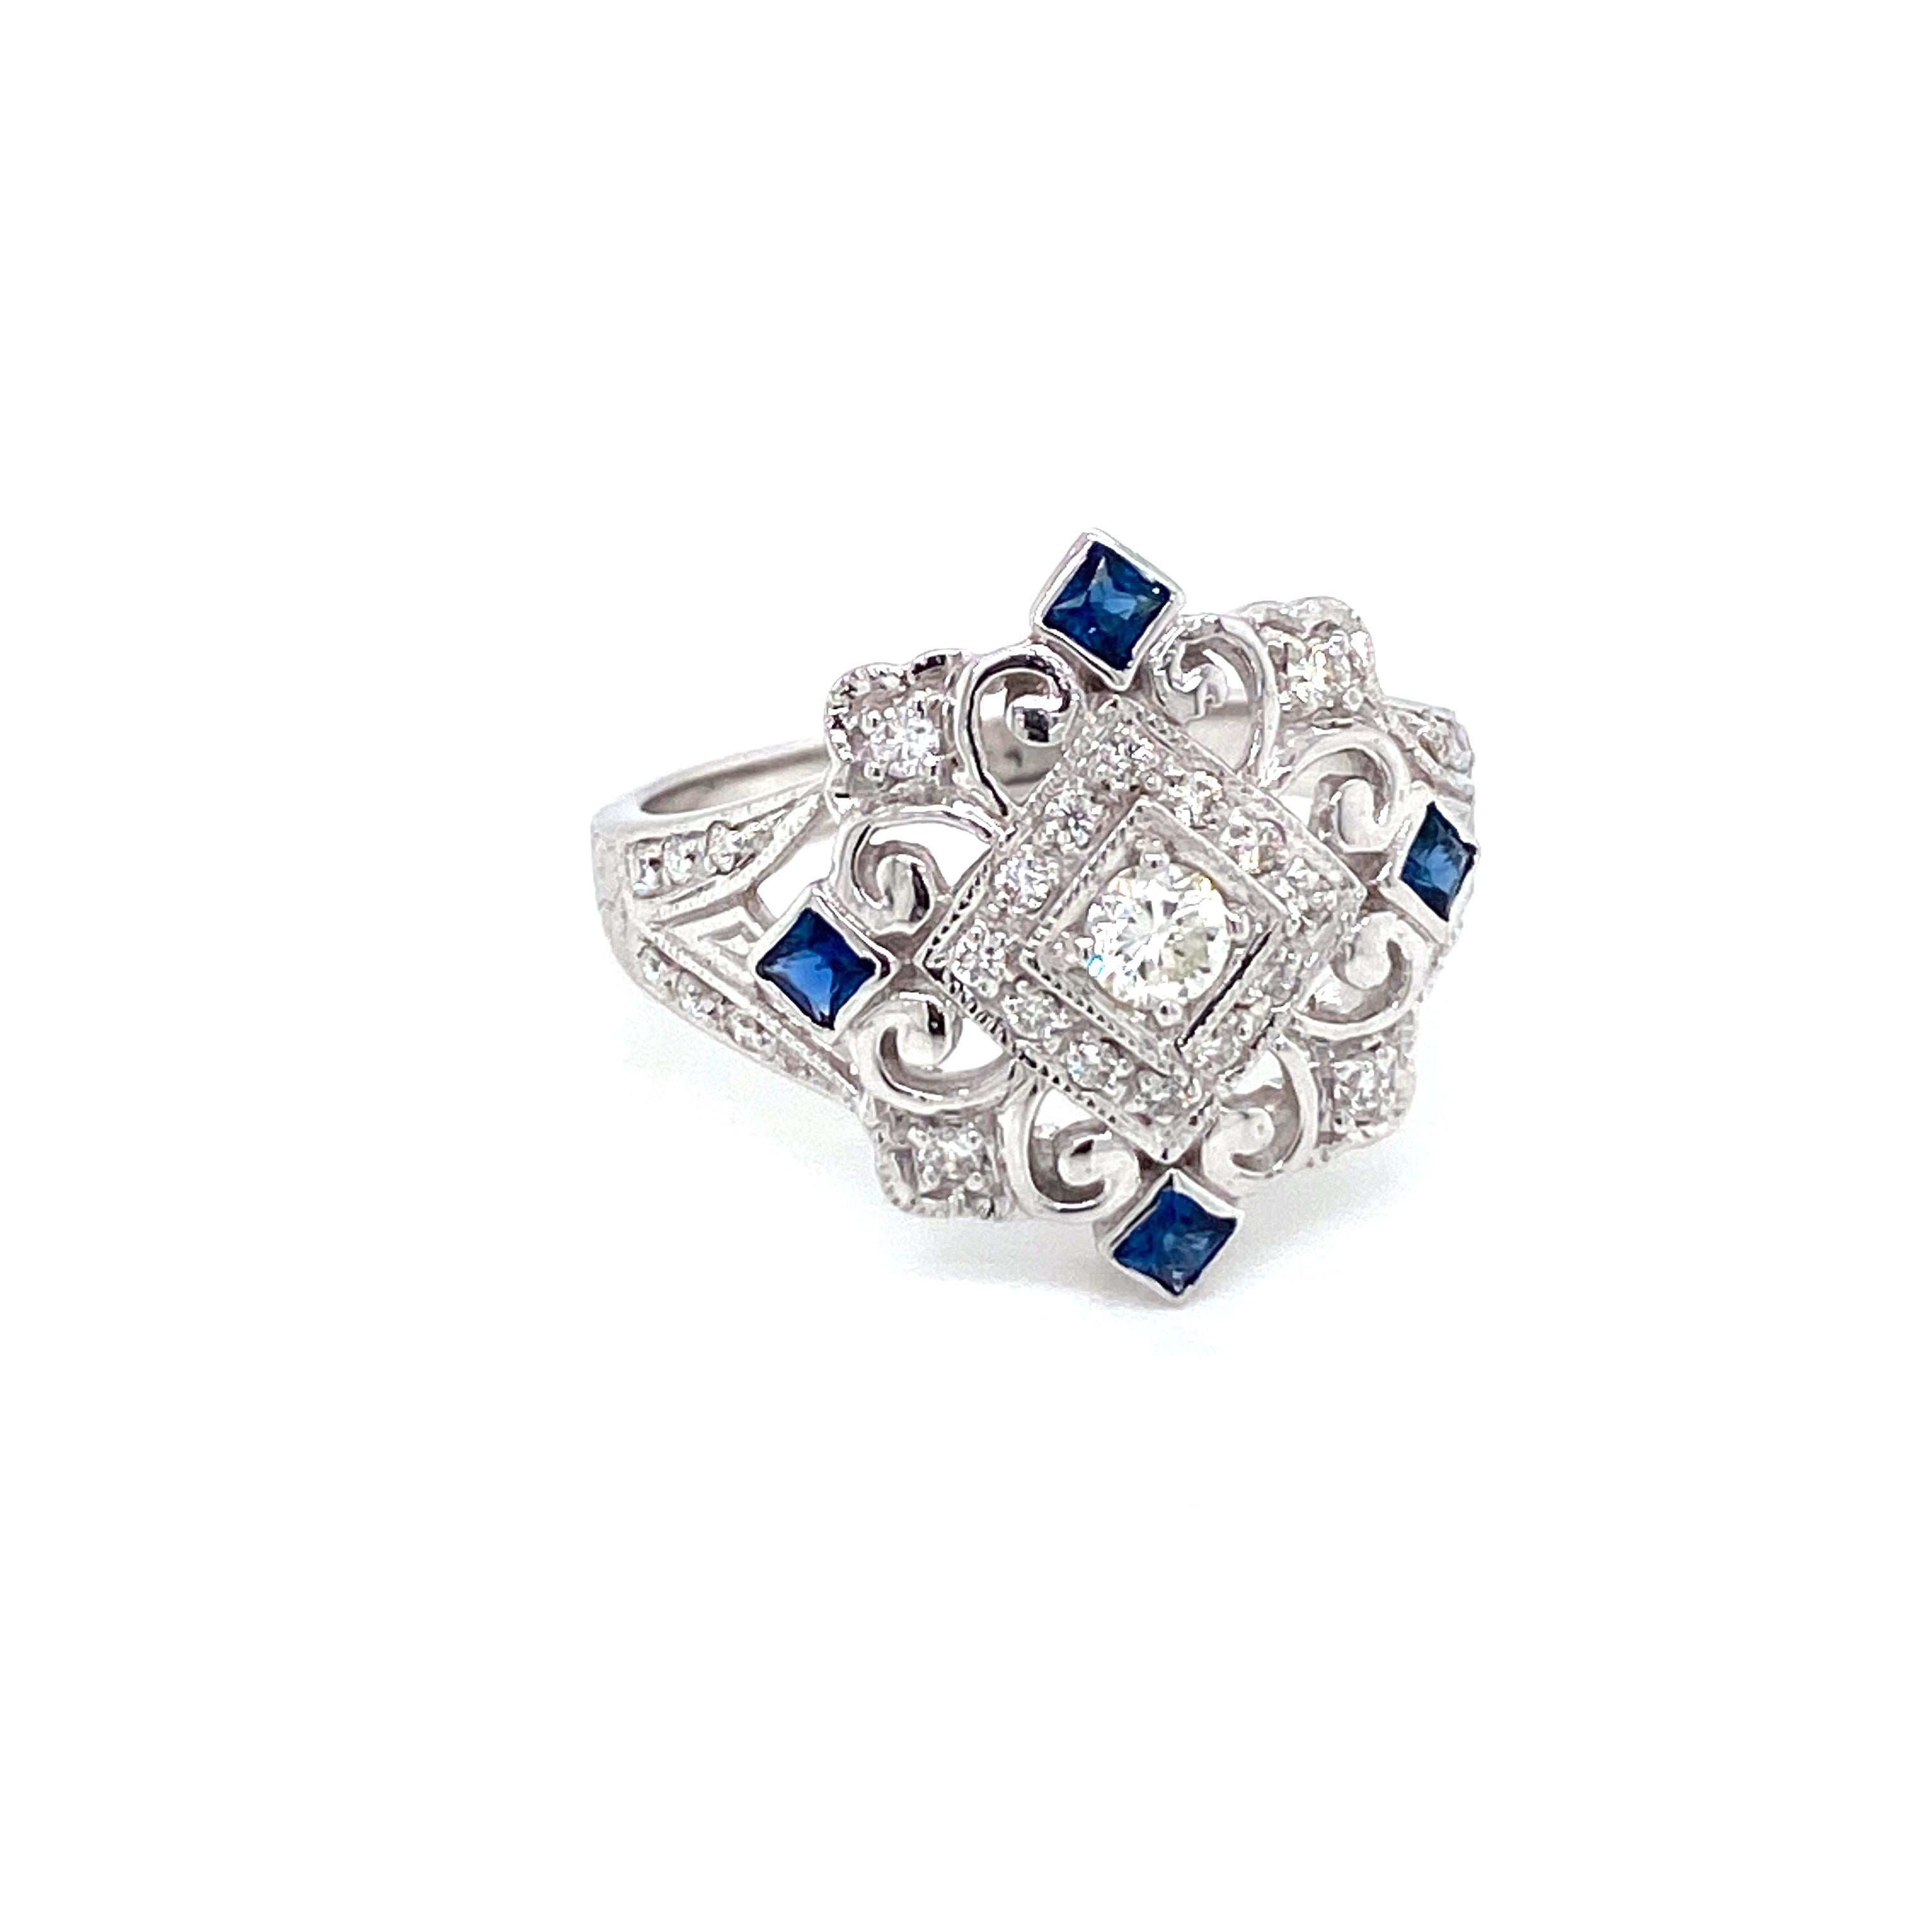 Beautiful Gold handmade Art Deco style ring, the mount features a fine filigree and engraving work.
It is set in 14k white Gold featuring Natural Sapphires custom cut and sparkling Round brilliant cut diamonds, total weight 0,50 ct. G color VVS1